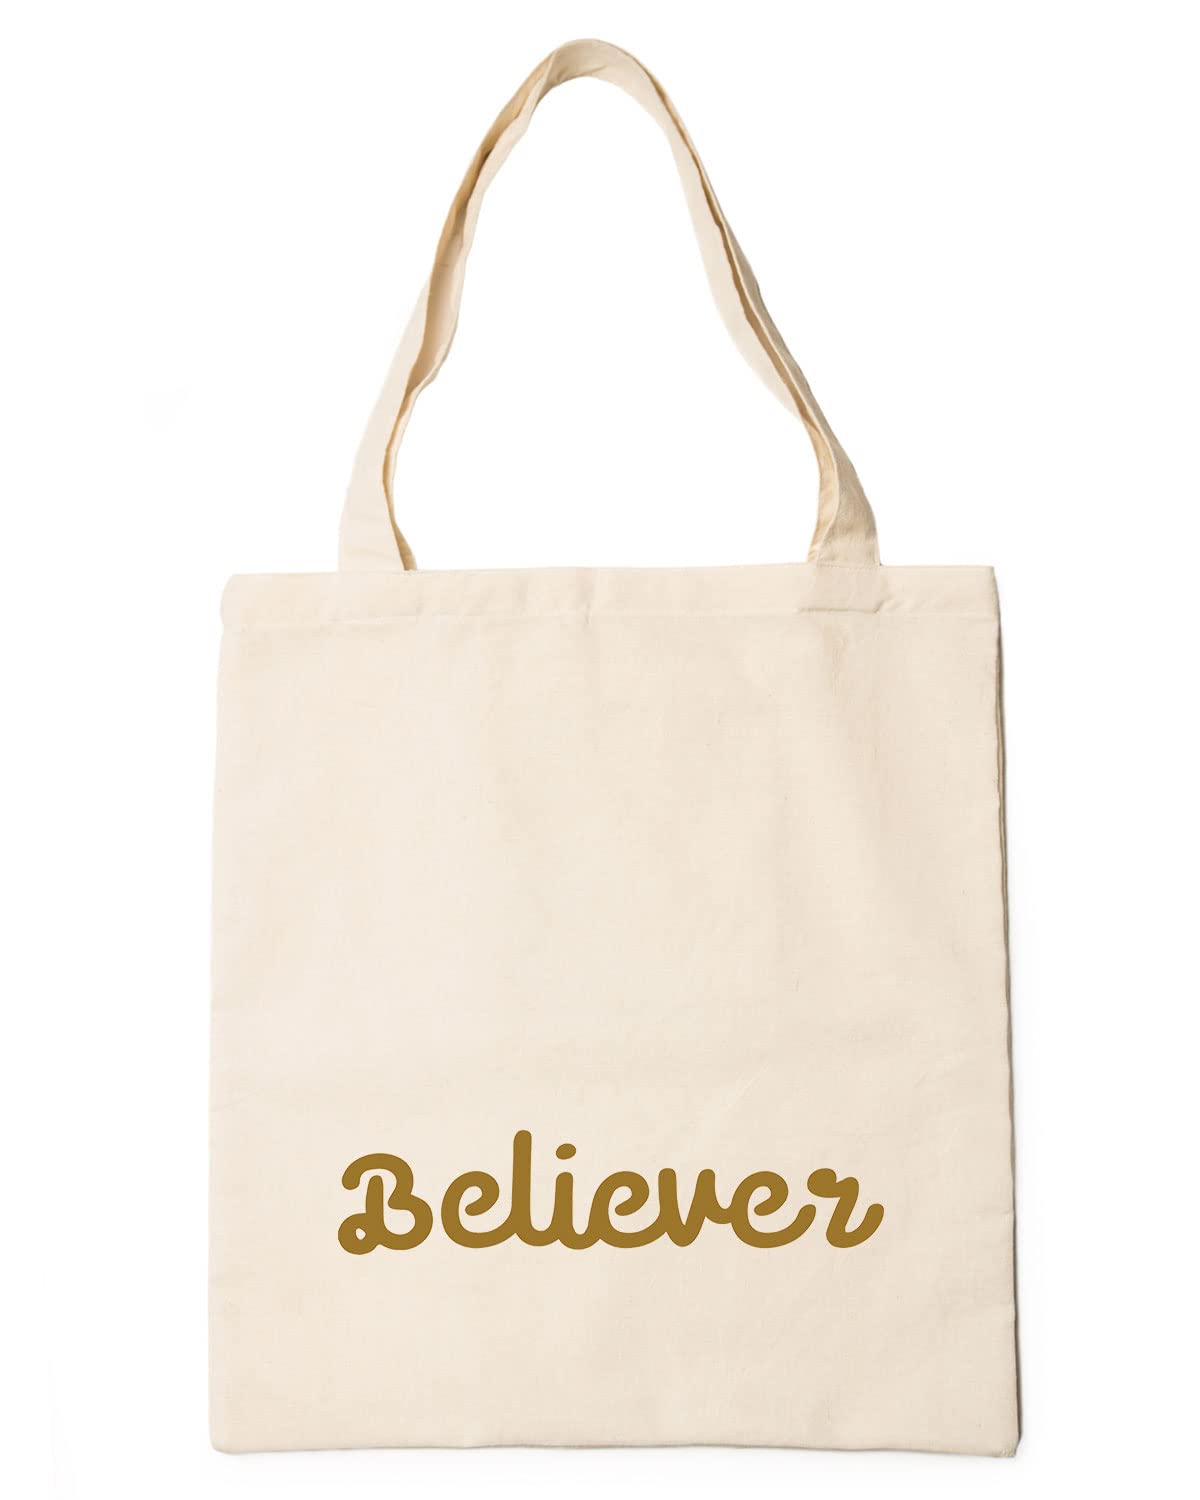 The Pink Magnet Believer Tote Bag - Canvas Tote Bag for Women | Printed Multipurpose Cotton Bags | Cute Hand Bag for Girls | Best for College, Travel, Grocery | Reusable Shopping Bag | Eco-Friendly Tote Bag